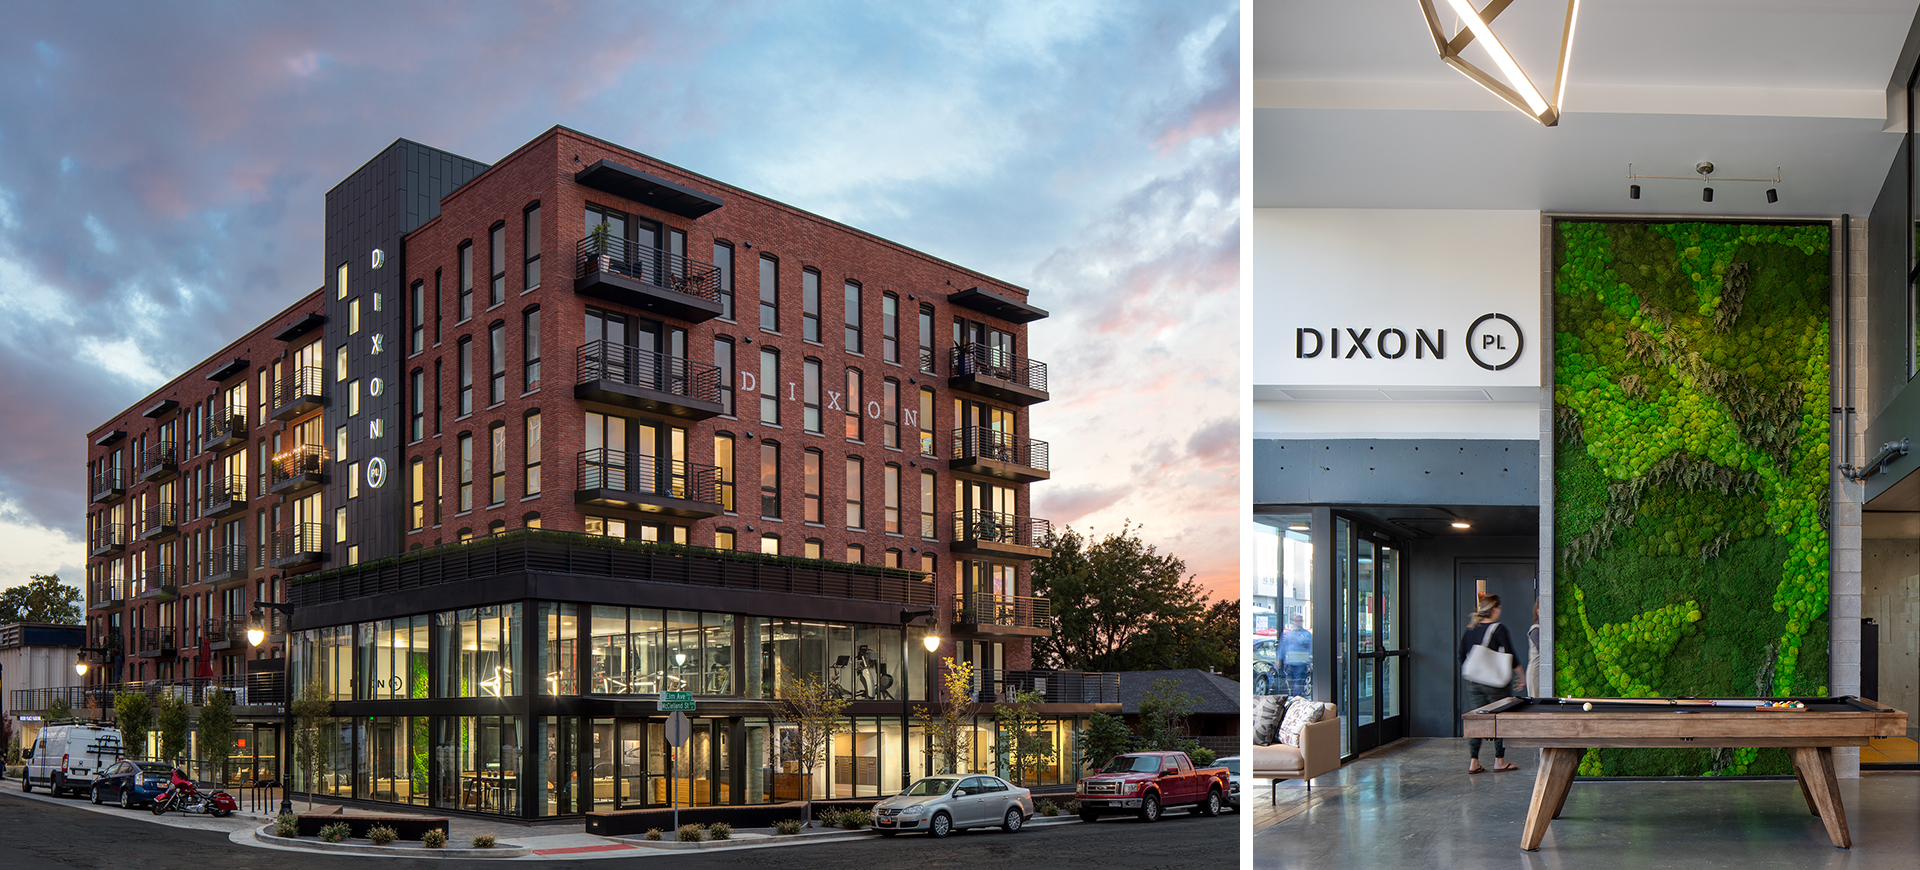 MVE + Partners Announces Opening of Dixon Place in Salt Lake City, a 6-story, 59-unit Mixed-use Apartment Community